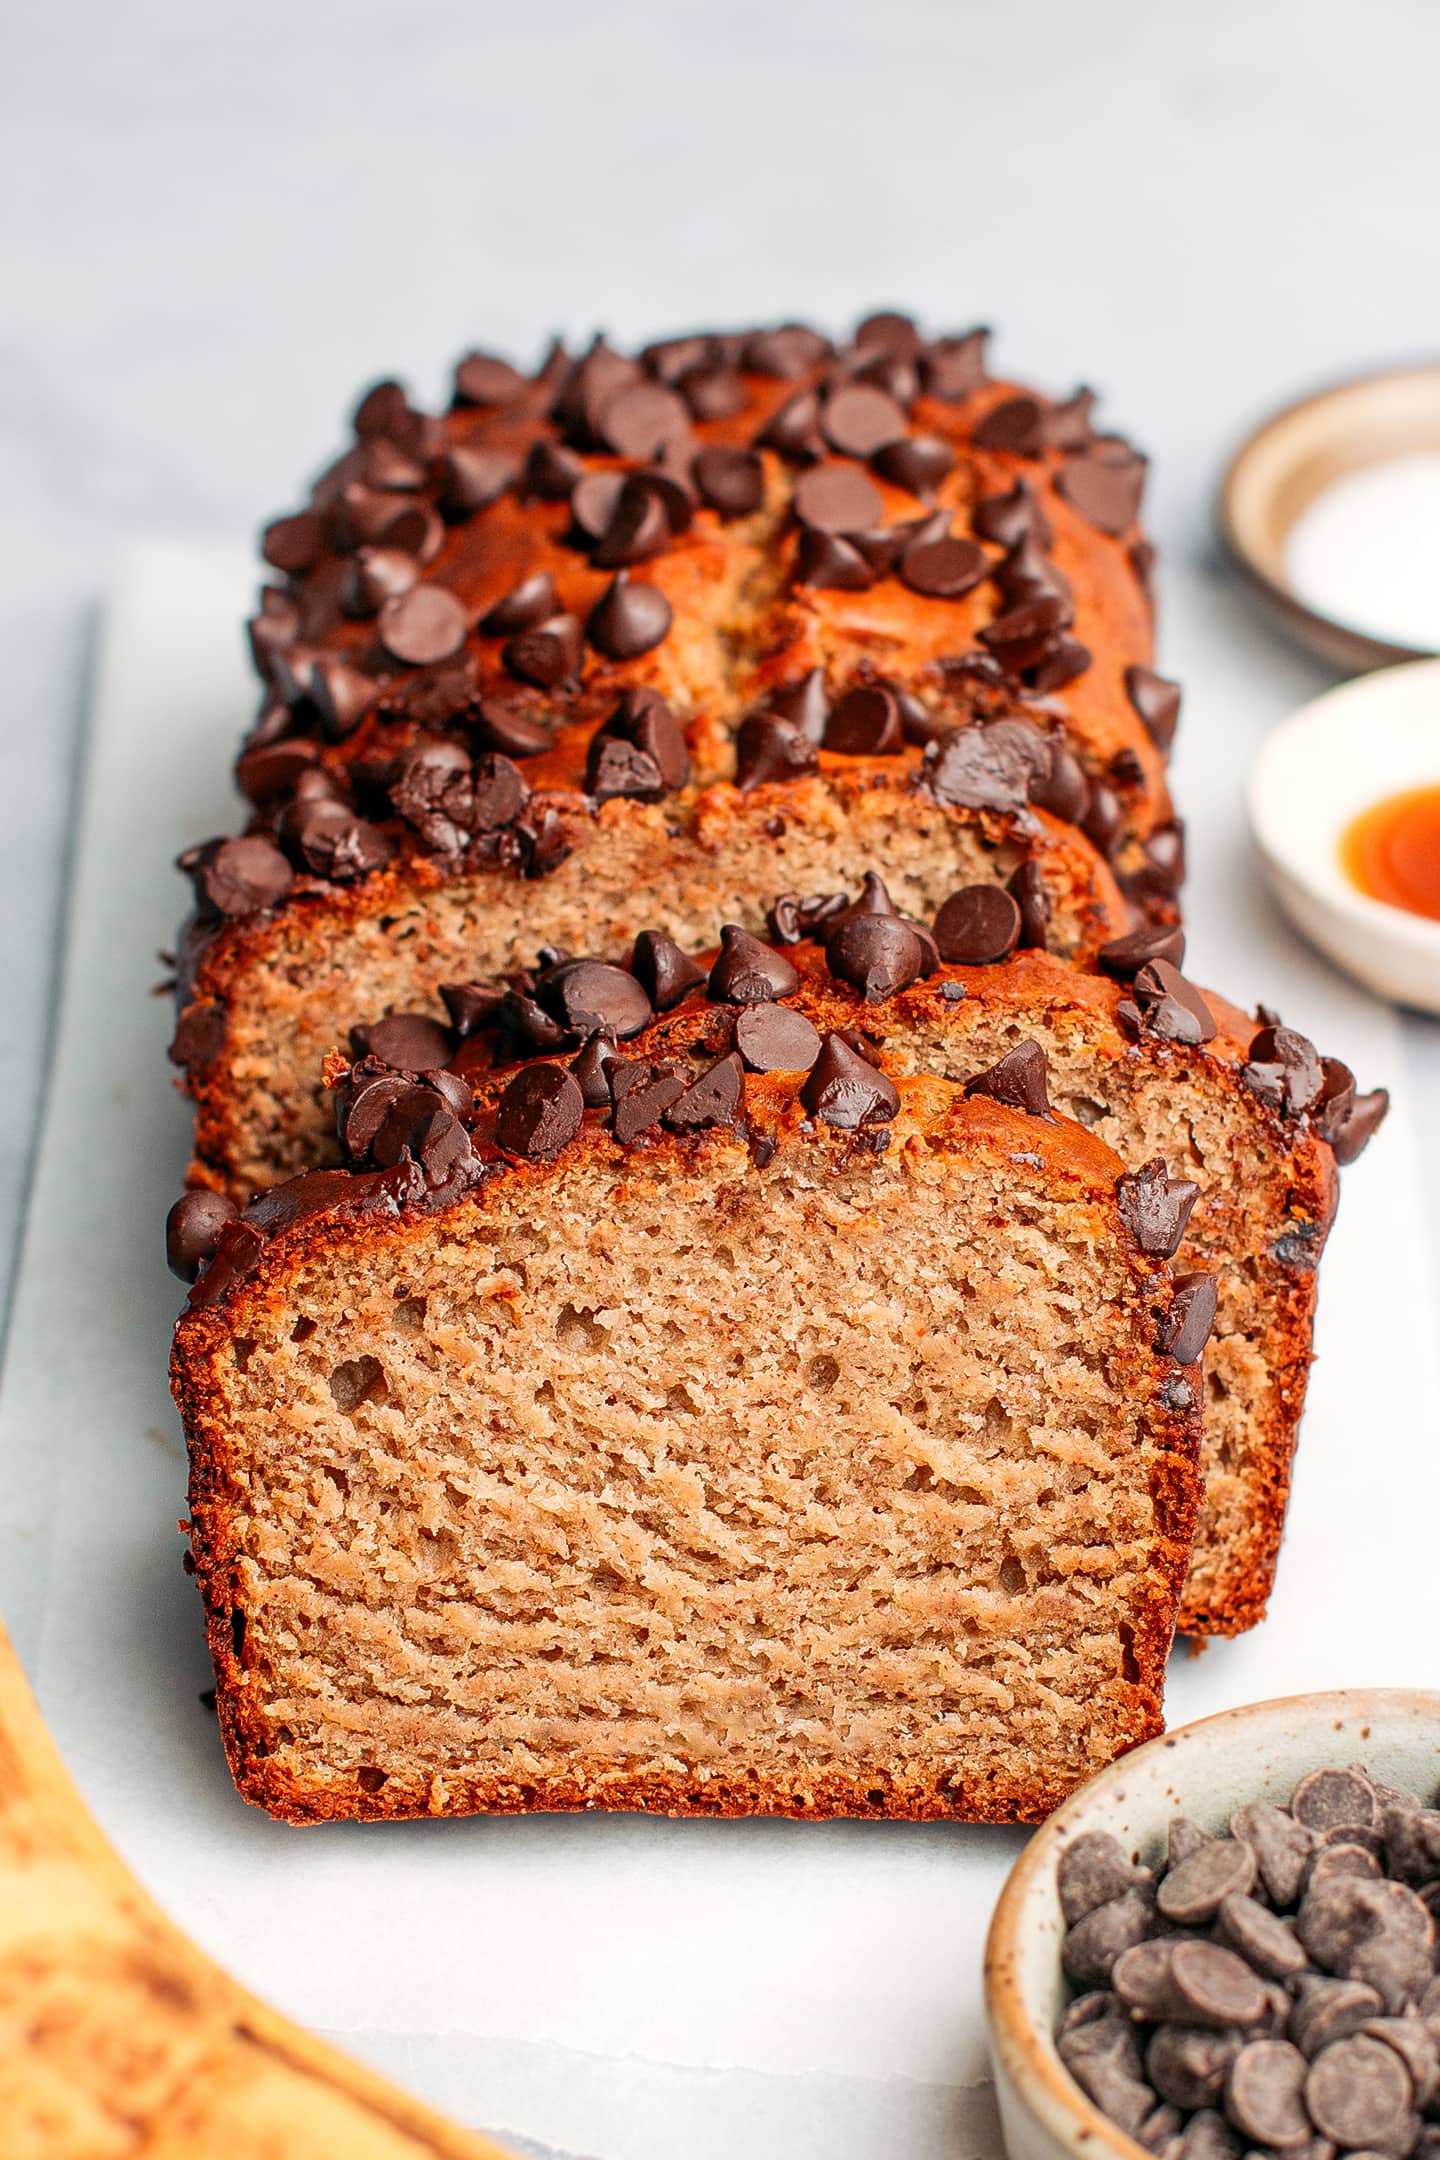 Sliced protein banana bread topped with chocolate chips.